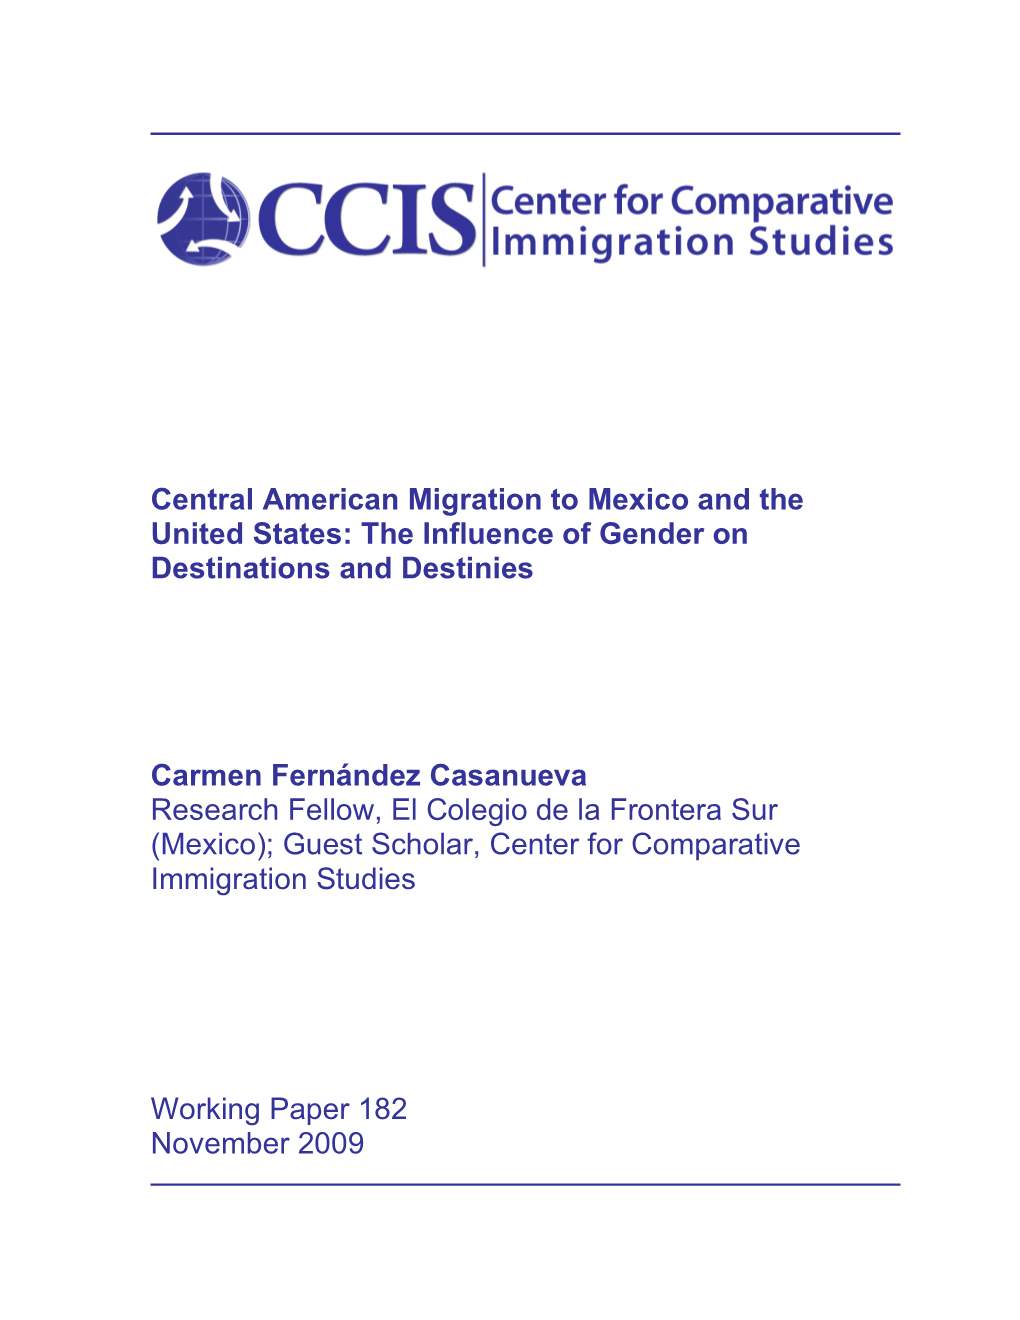 Central American Migration to Mexico and the United States: the Influence of Gender on Destinations and Destinies